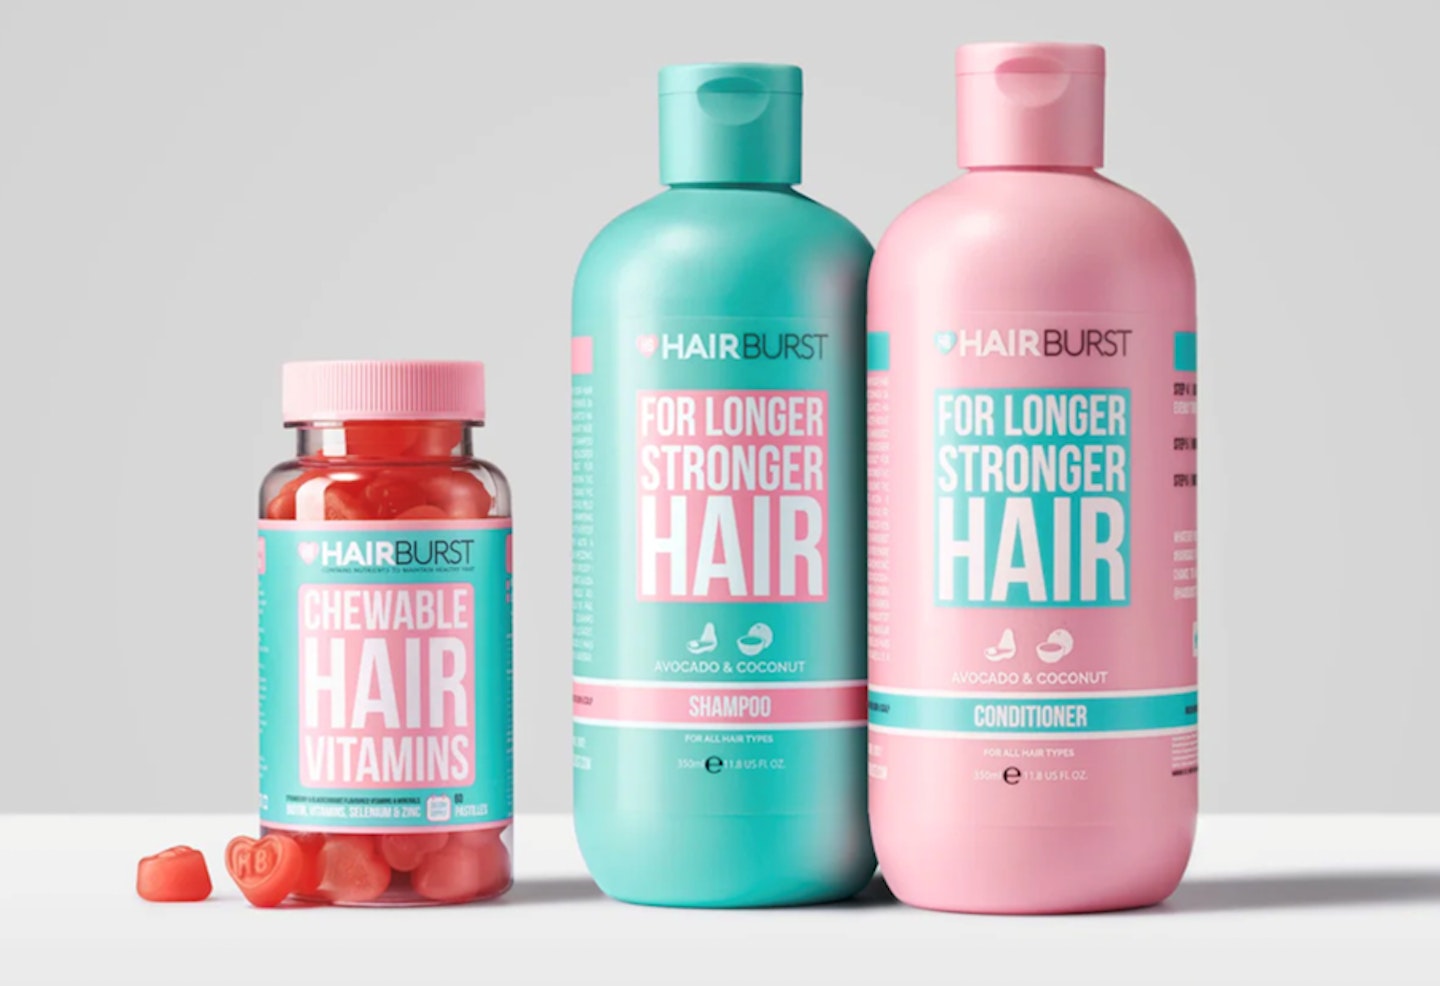 The Chewable Hair Growth Bundle